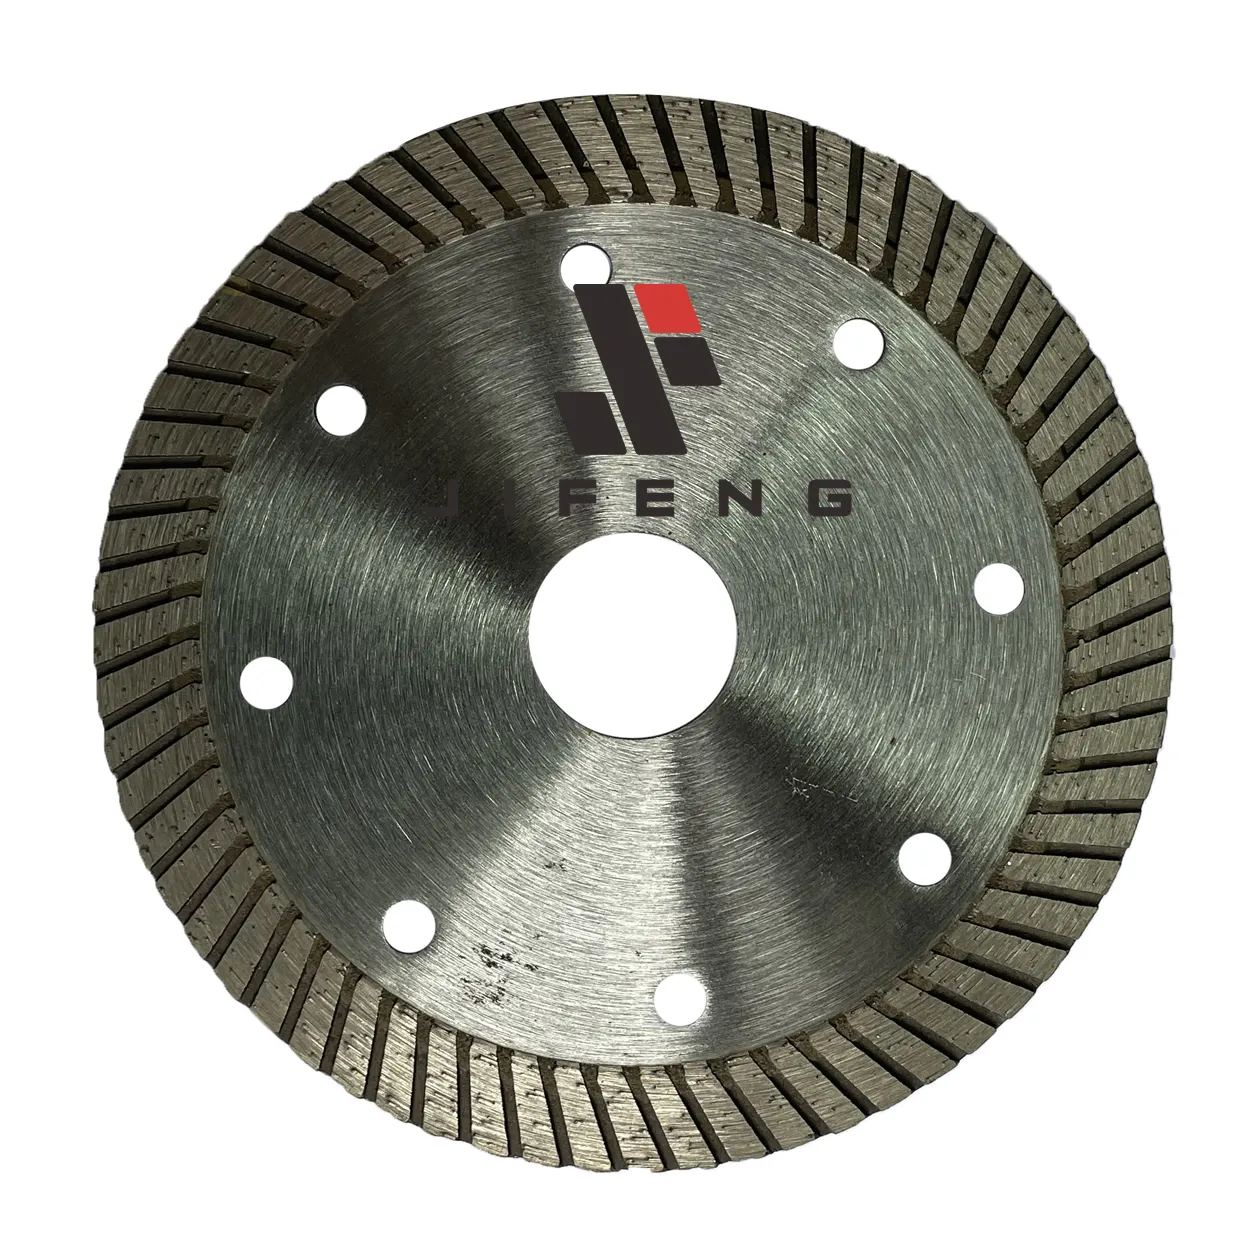 Diamond Cutting Tools turbo saw blade Stone Reinforced Cured concrete Sandstone cutting tools Tuck point blade